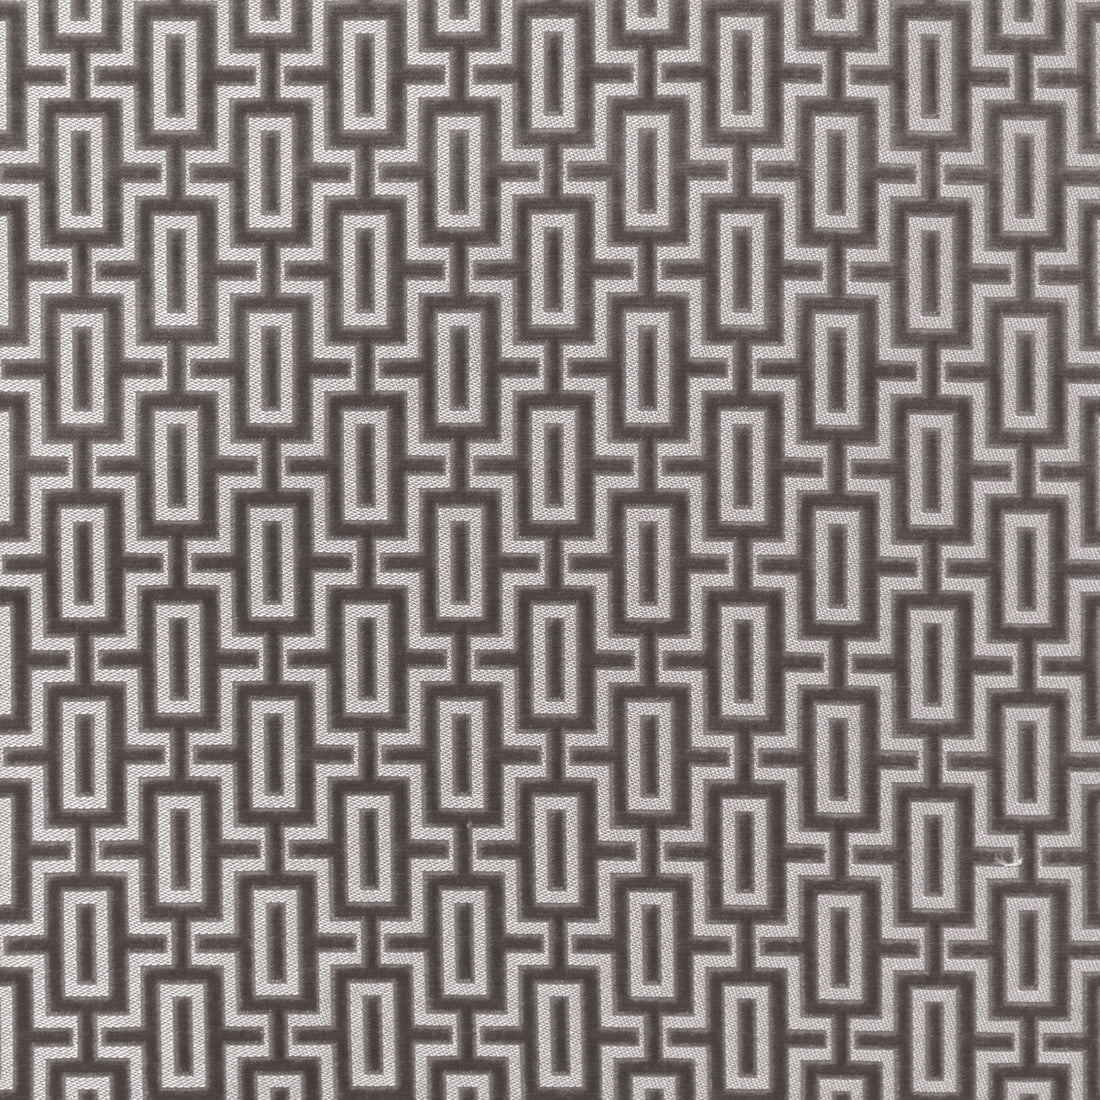 Joyride fabric in moonlight color - pattern 37286.11.0 - by Kravet Contract in the Happy Hour collection